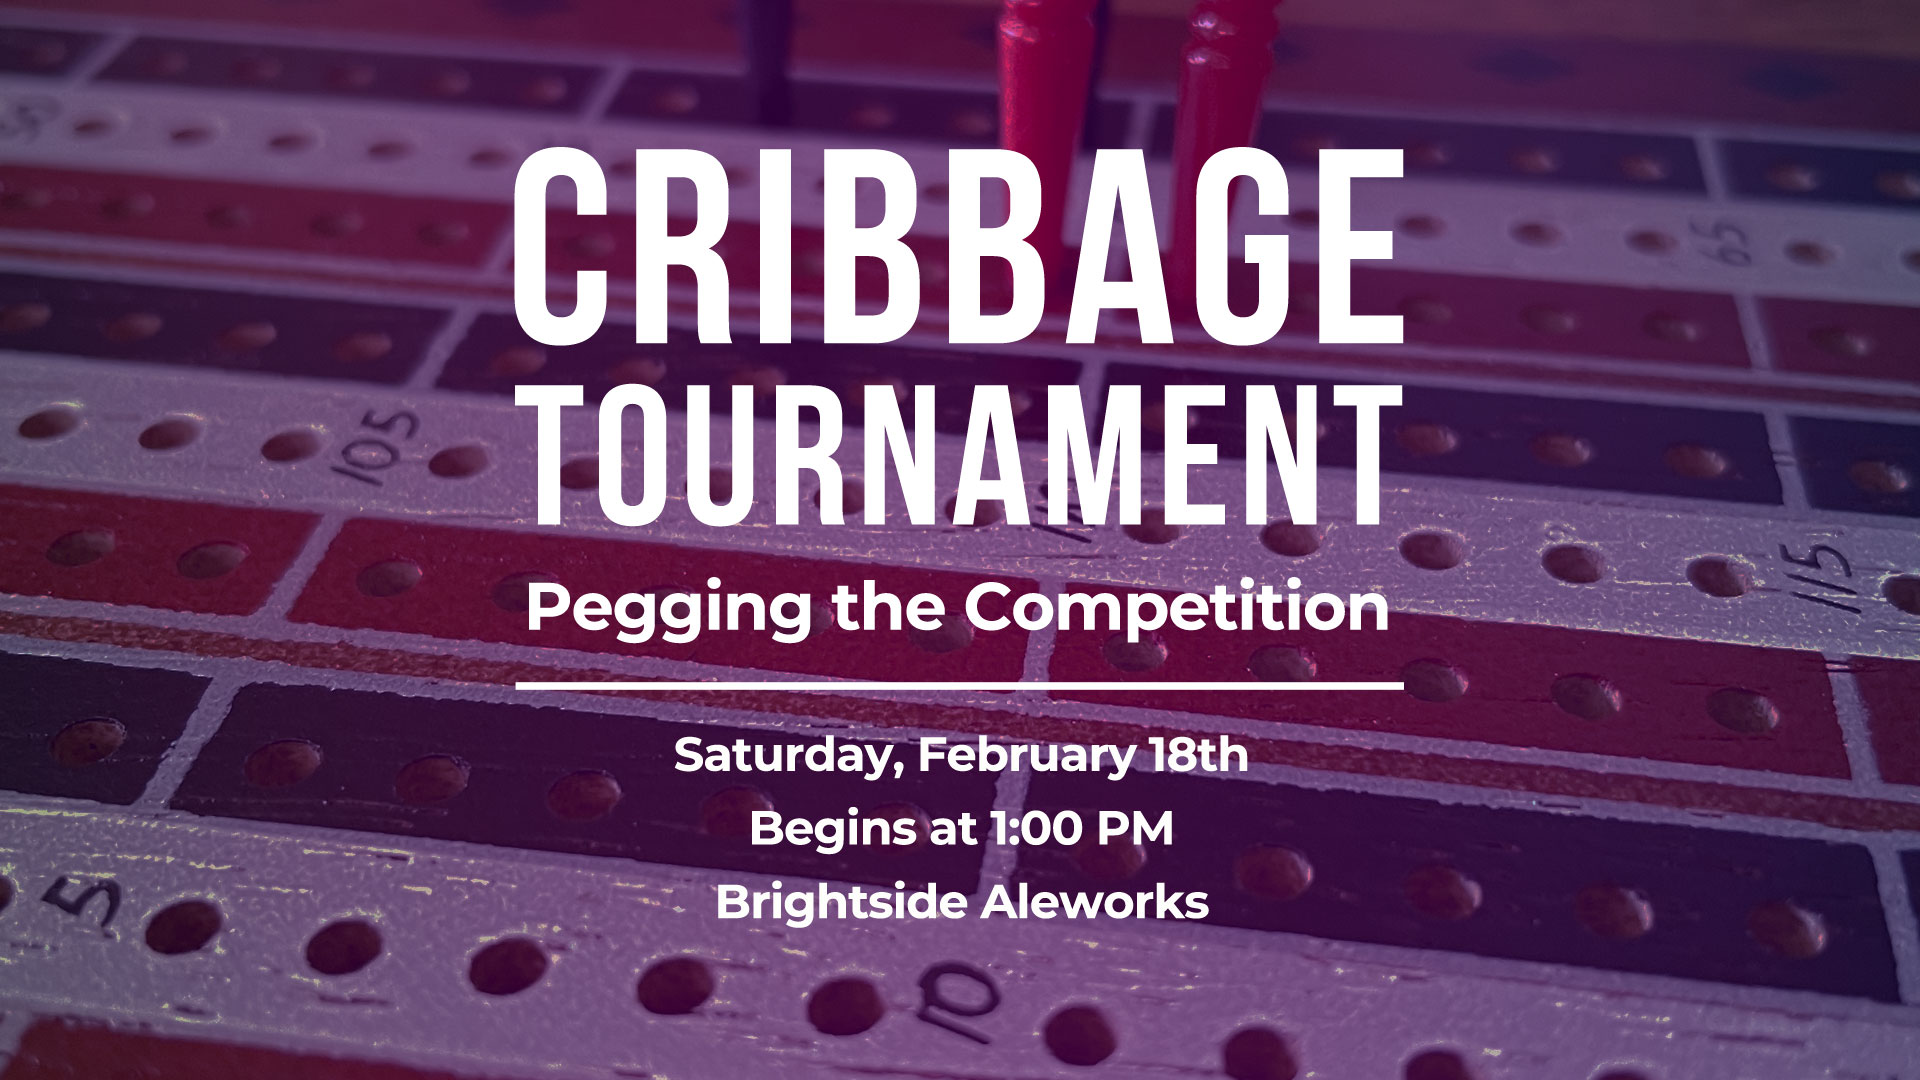 Cribbage Tournament at Brightside Aleworks February 18th, 2023